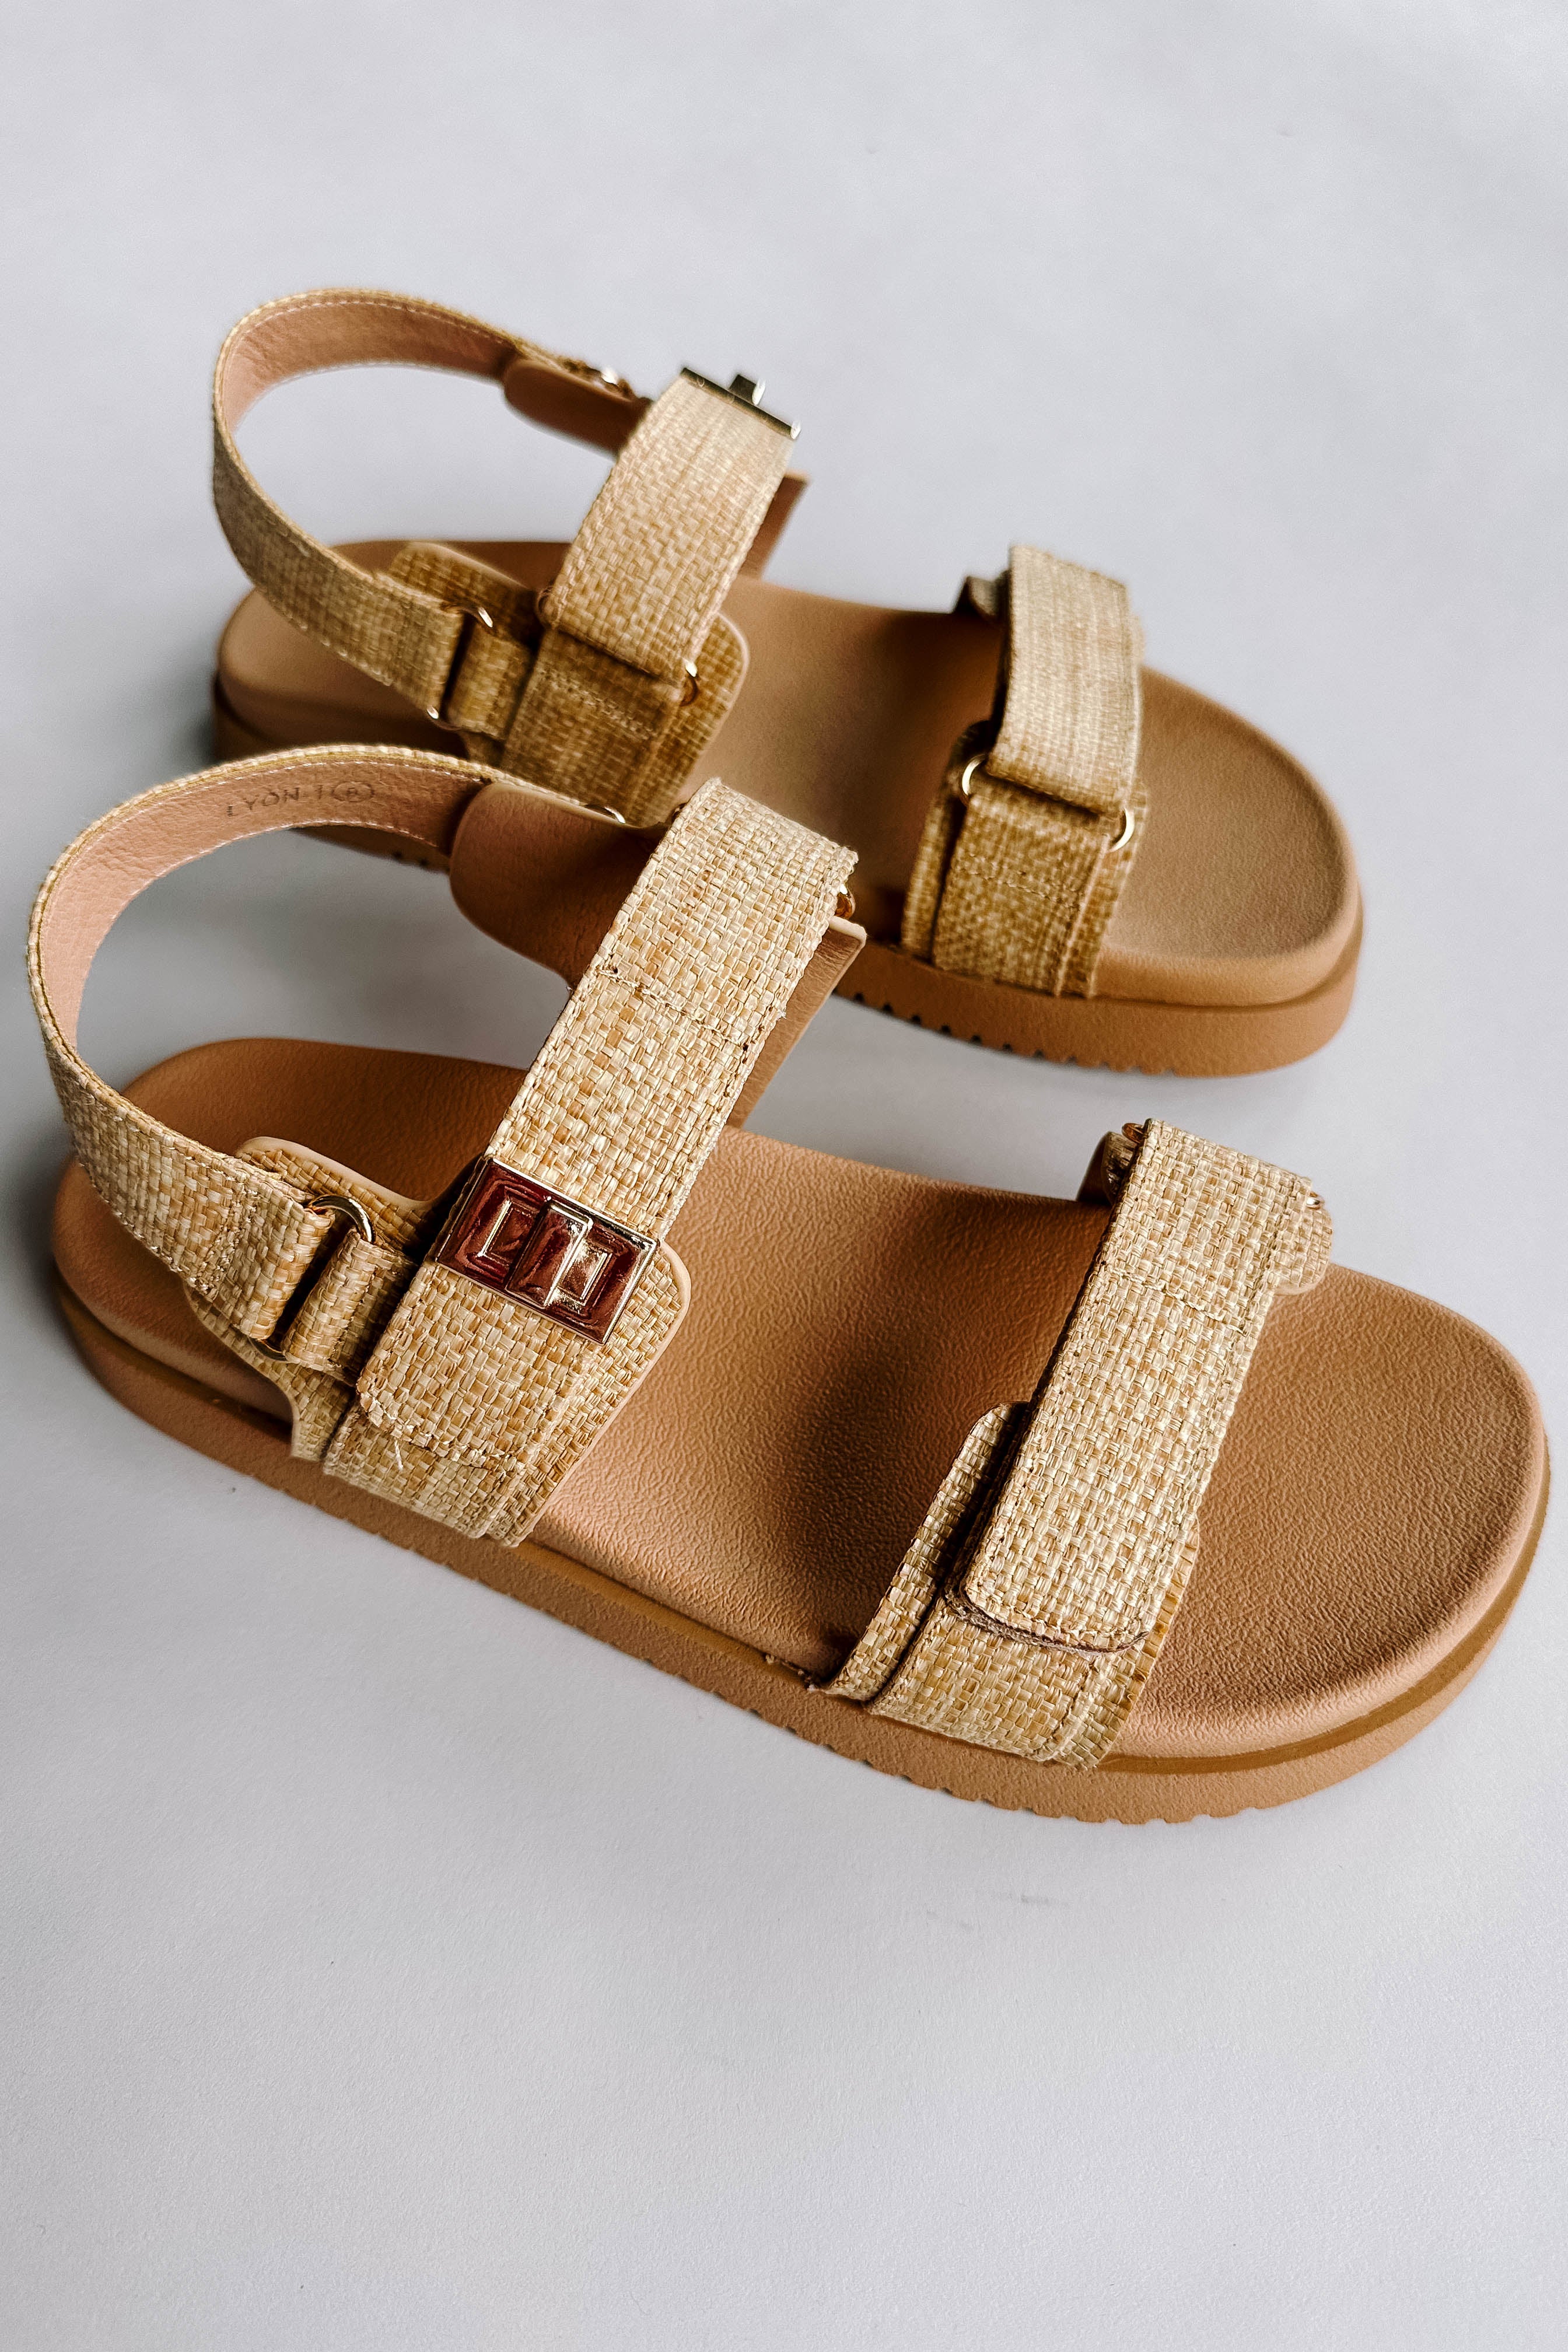 Side view of the Lyon Sandal in Beige Raffia which features natural raffia fabric, two adjustable velcro straps, adjustable back strap and round toe.